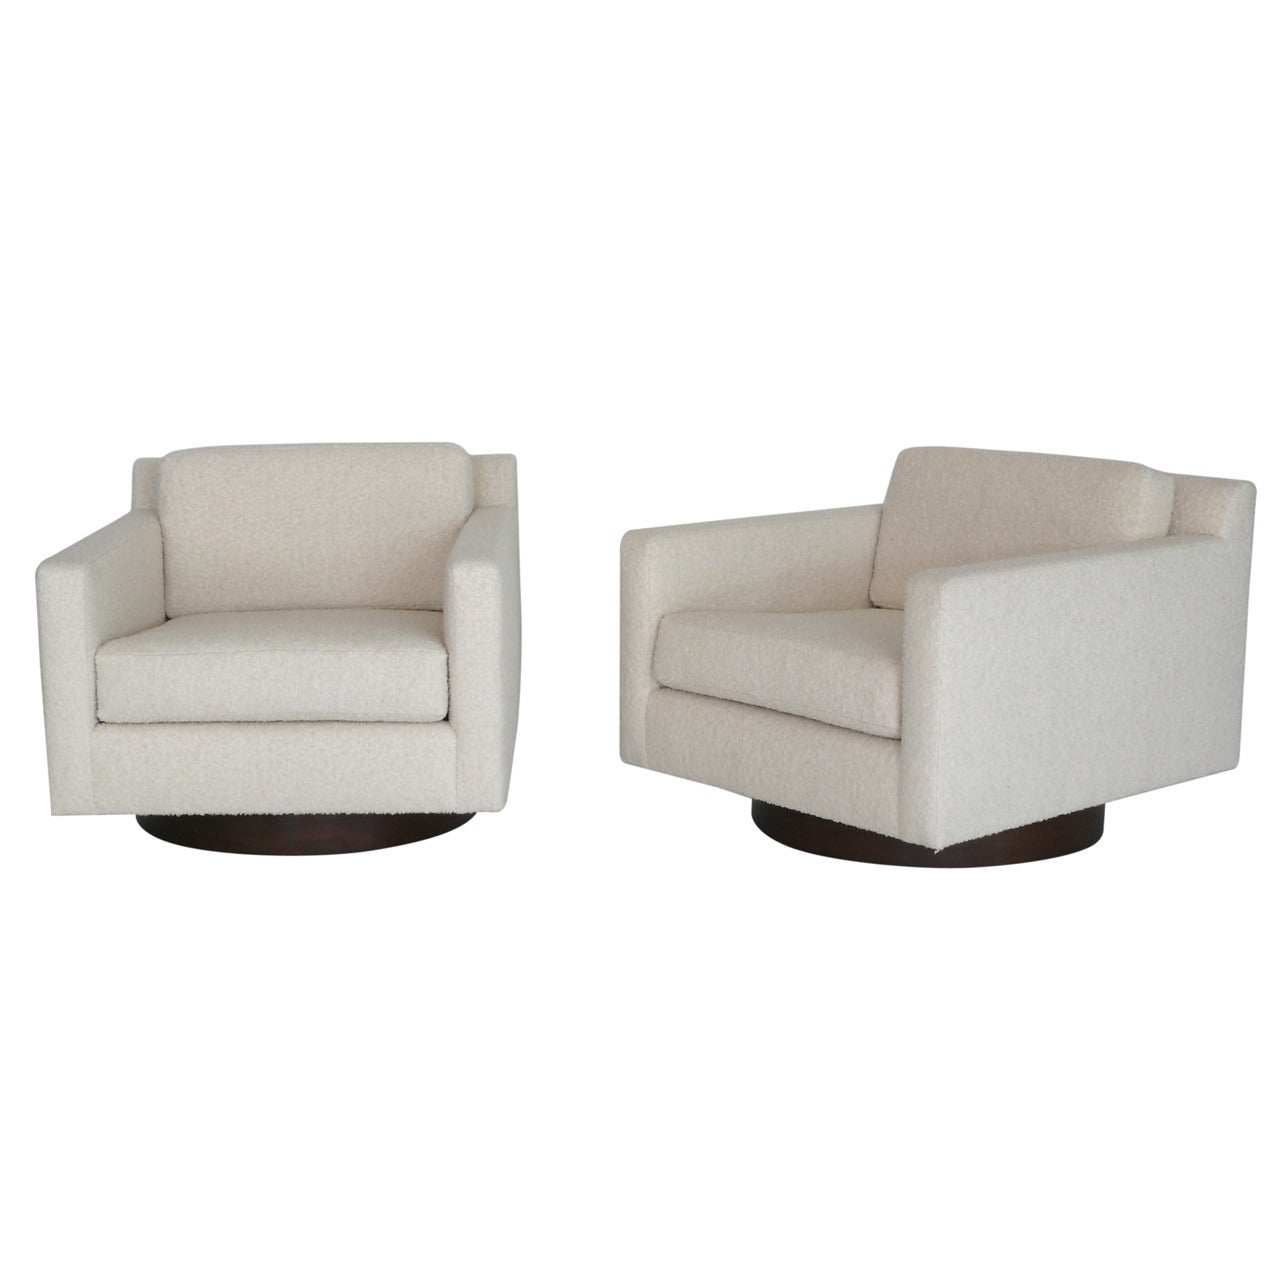 Square Wool Boucle Swivel Chairs For Sale